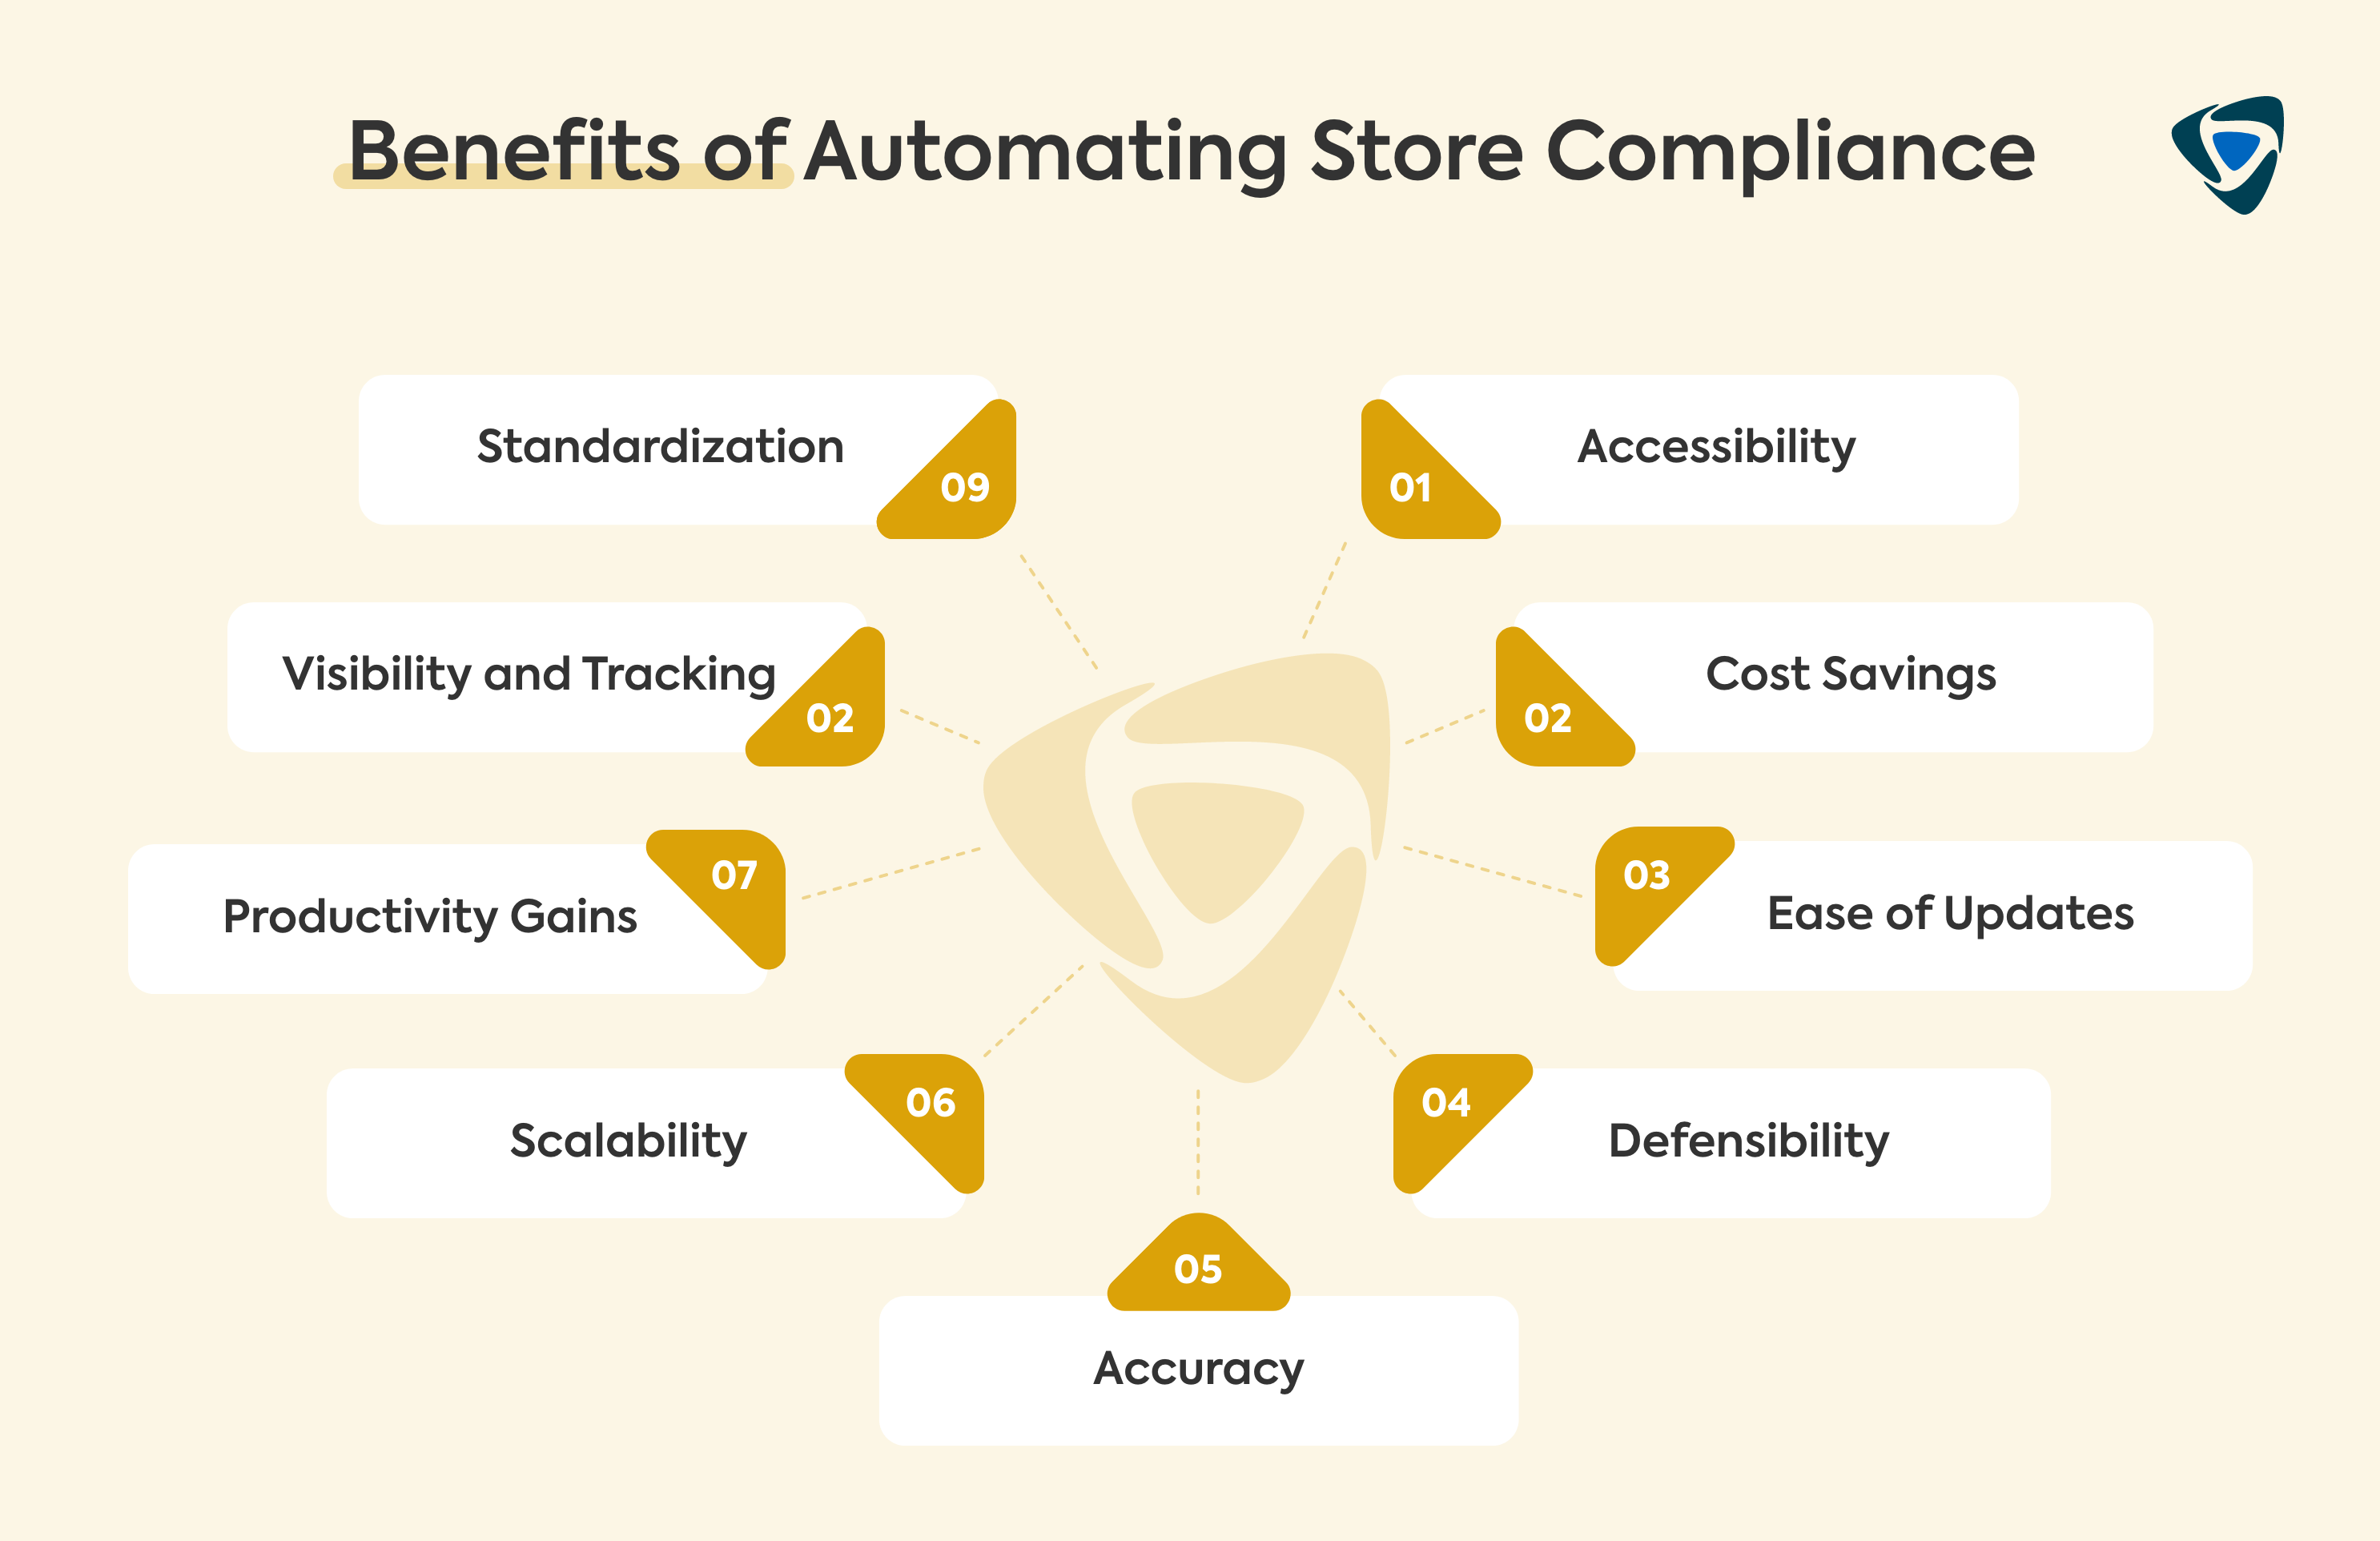 Benefits of Automating Store Compliance